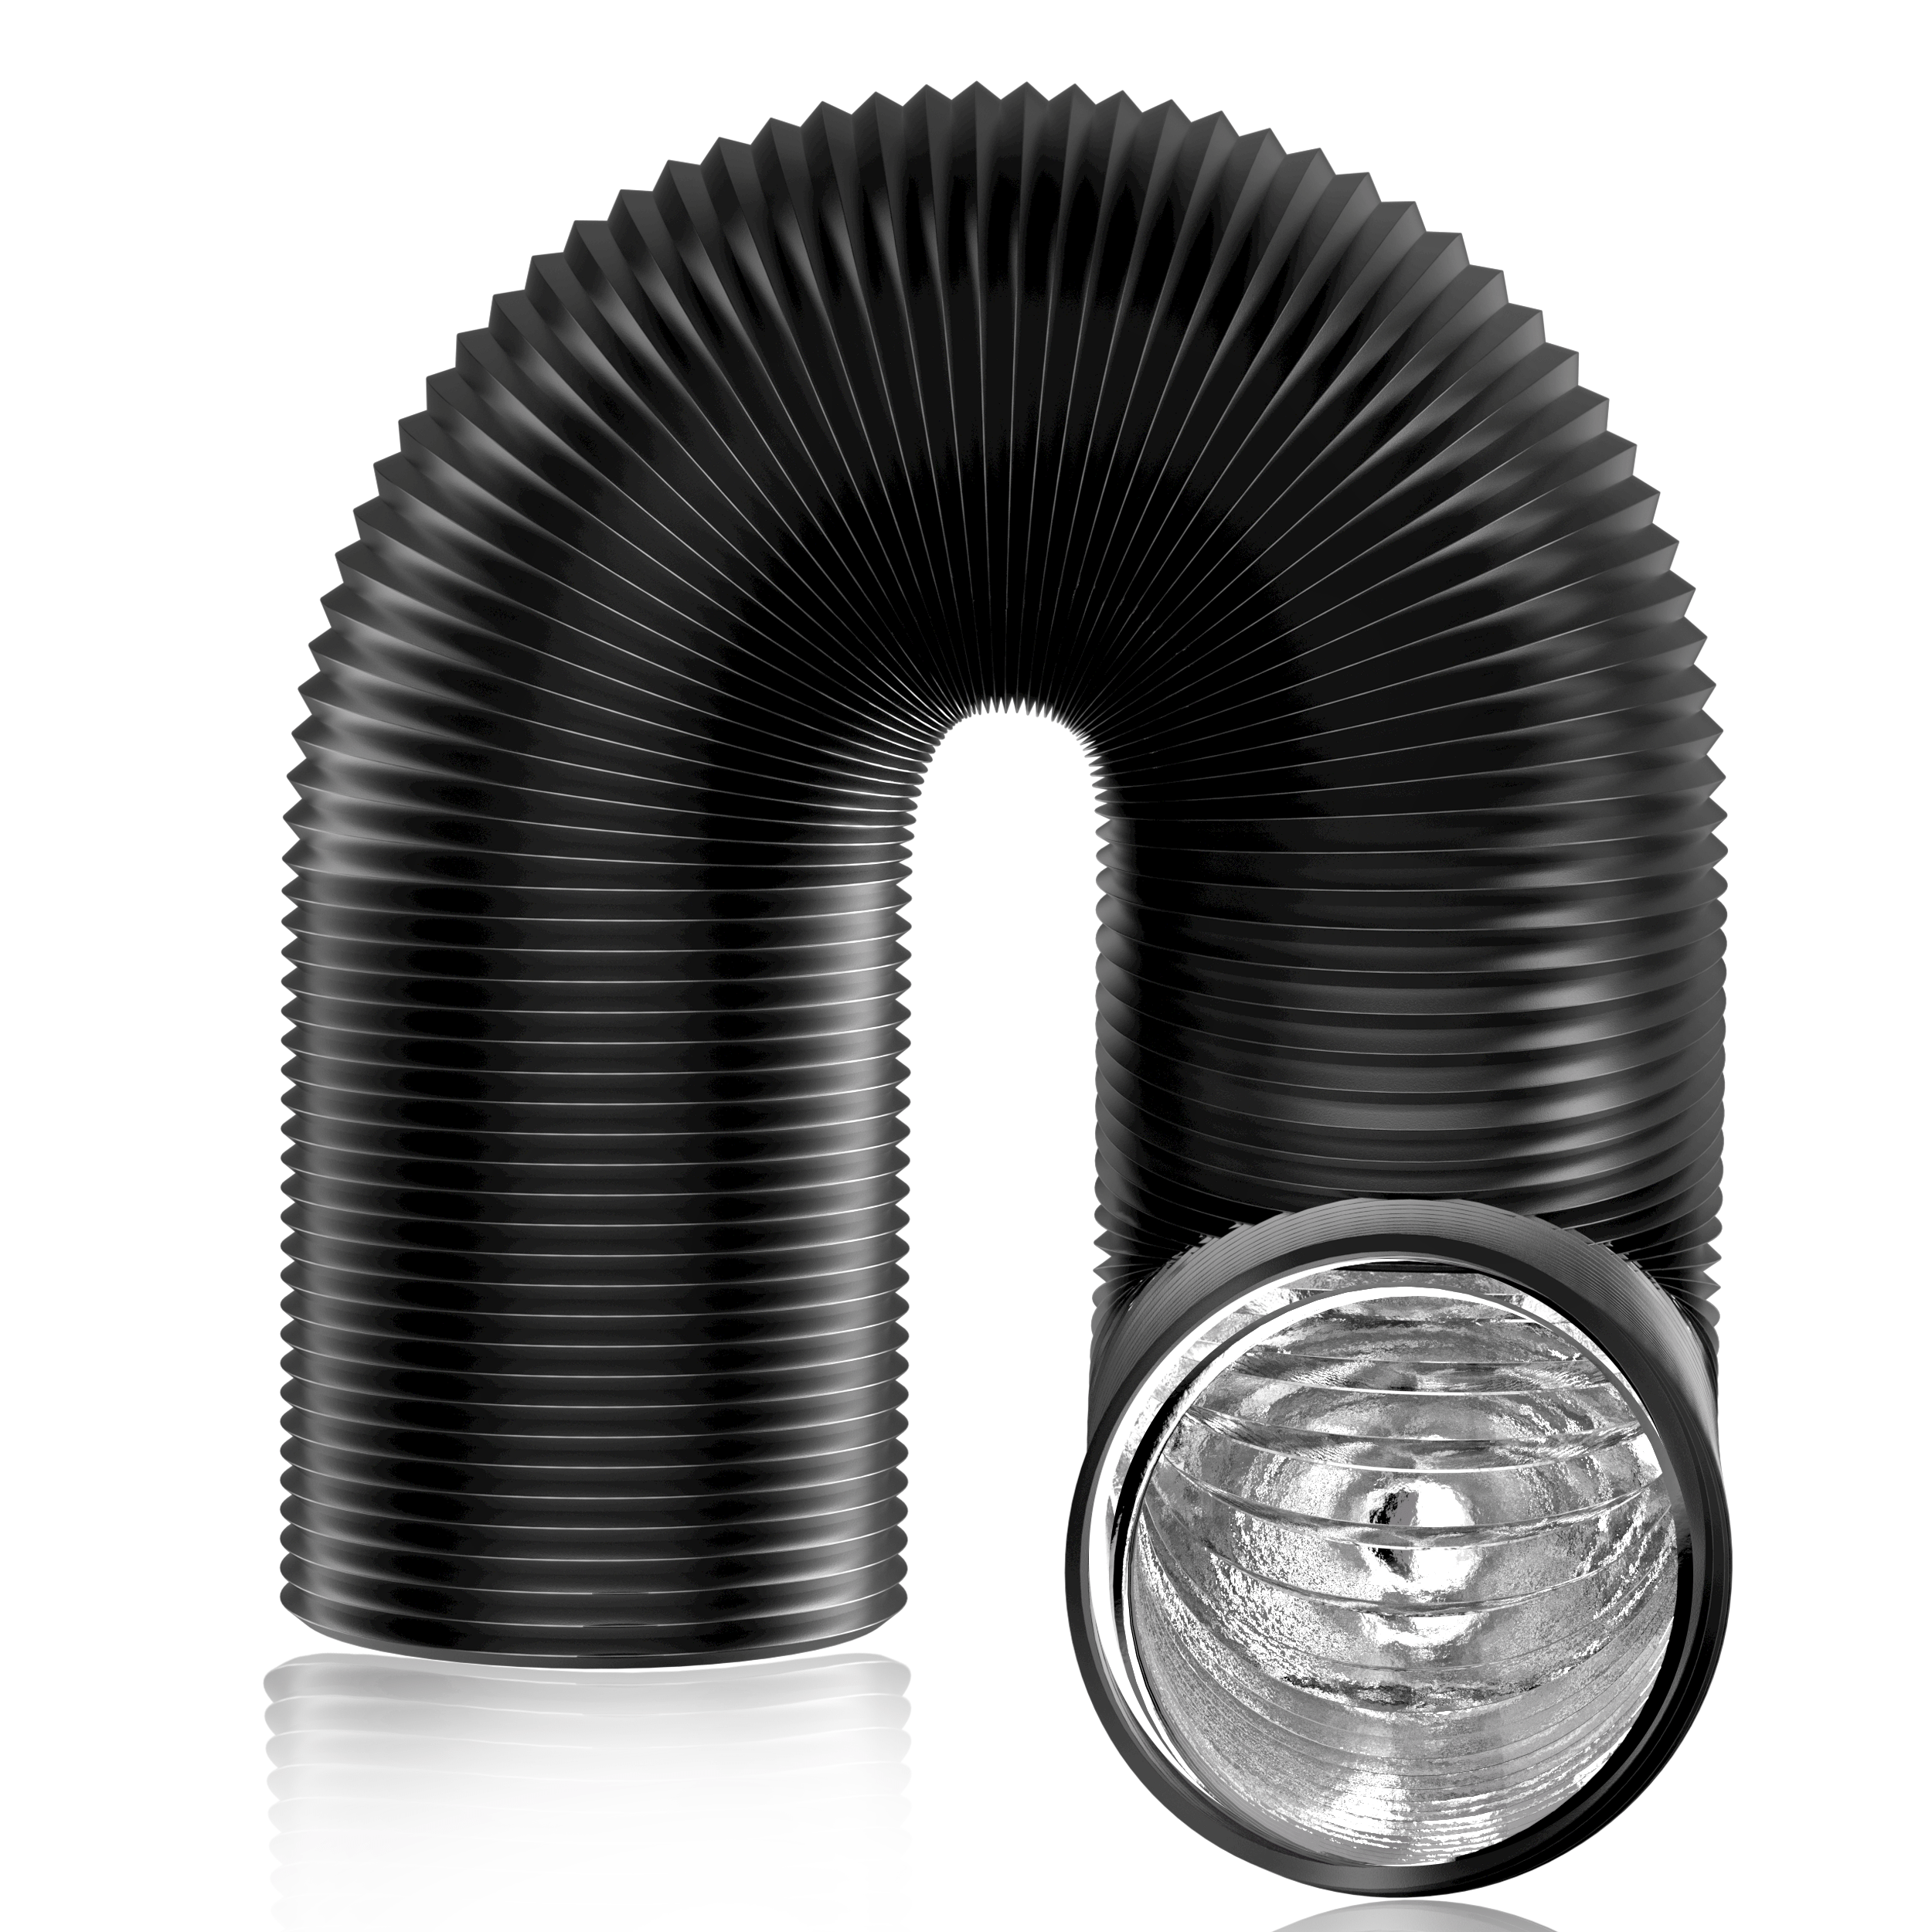 Black Heavy-Duty Four-Layer Protection Dryer Vent Hose for Heating Cooling Ventilation and Exhaust